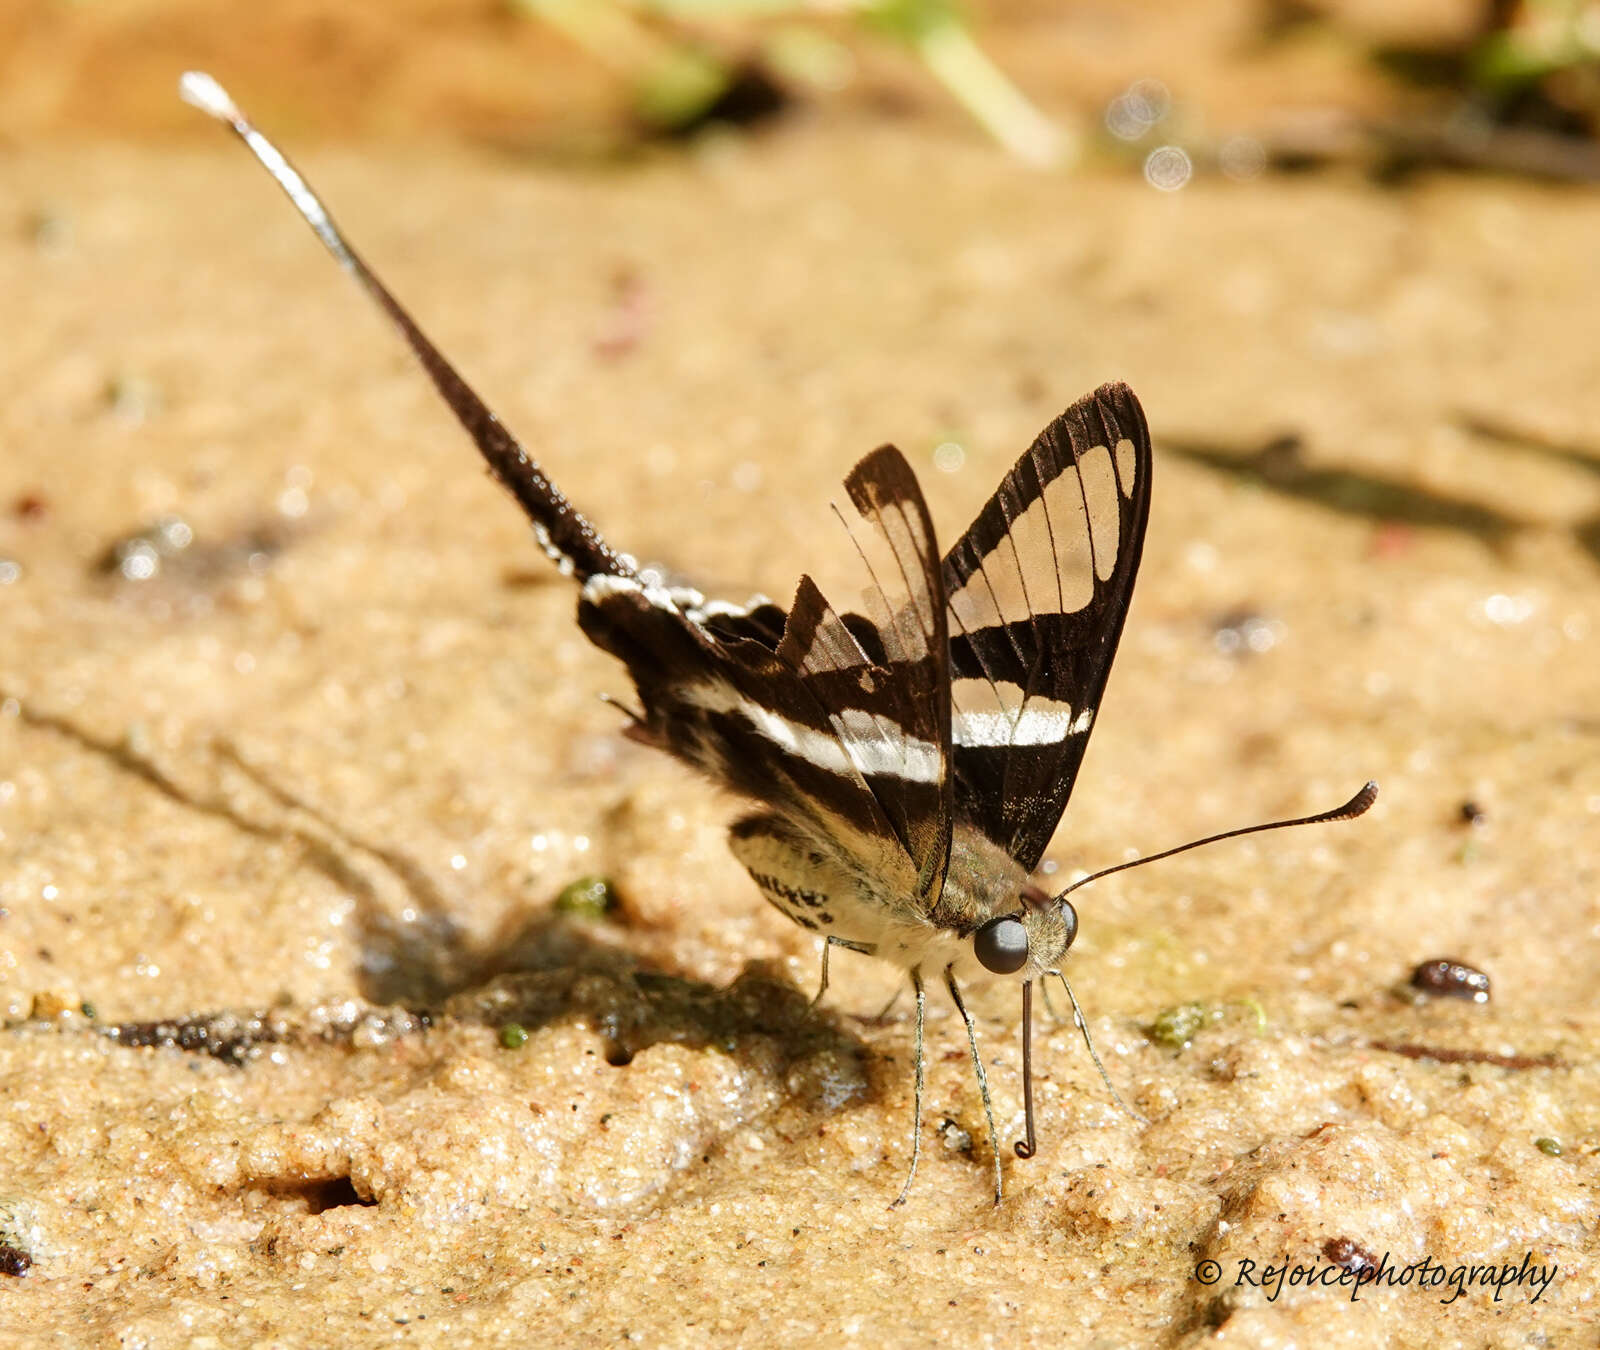 Image of White Dragontail Butterfly